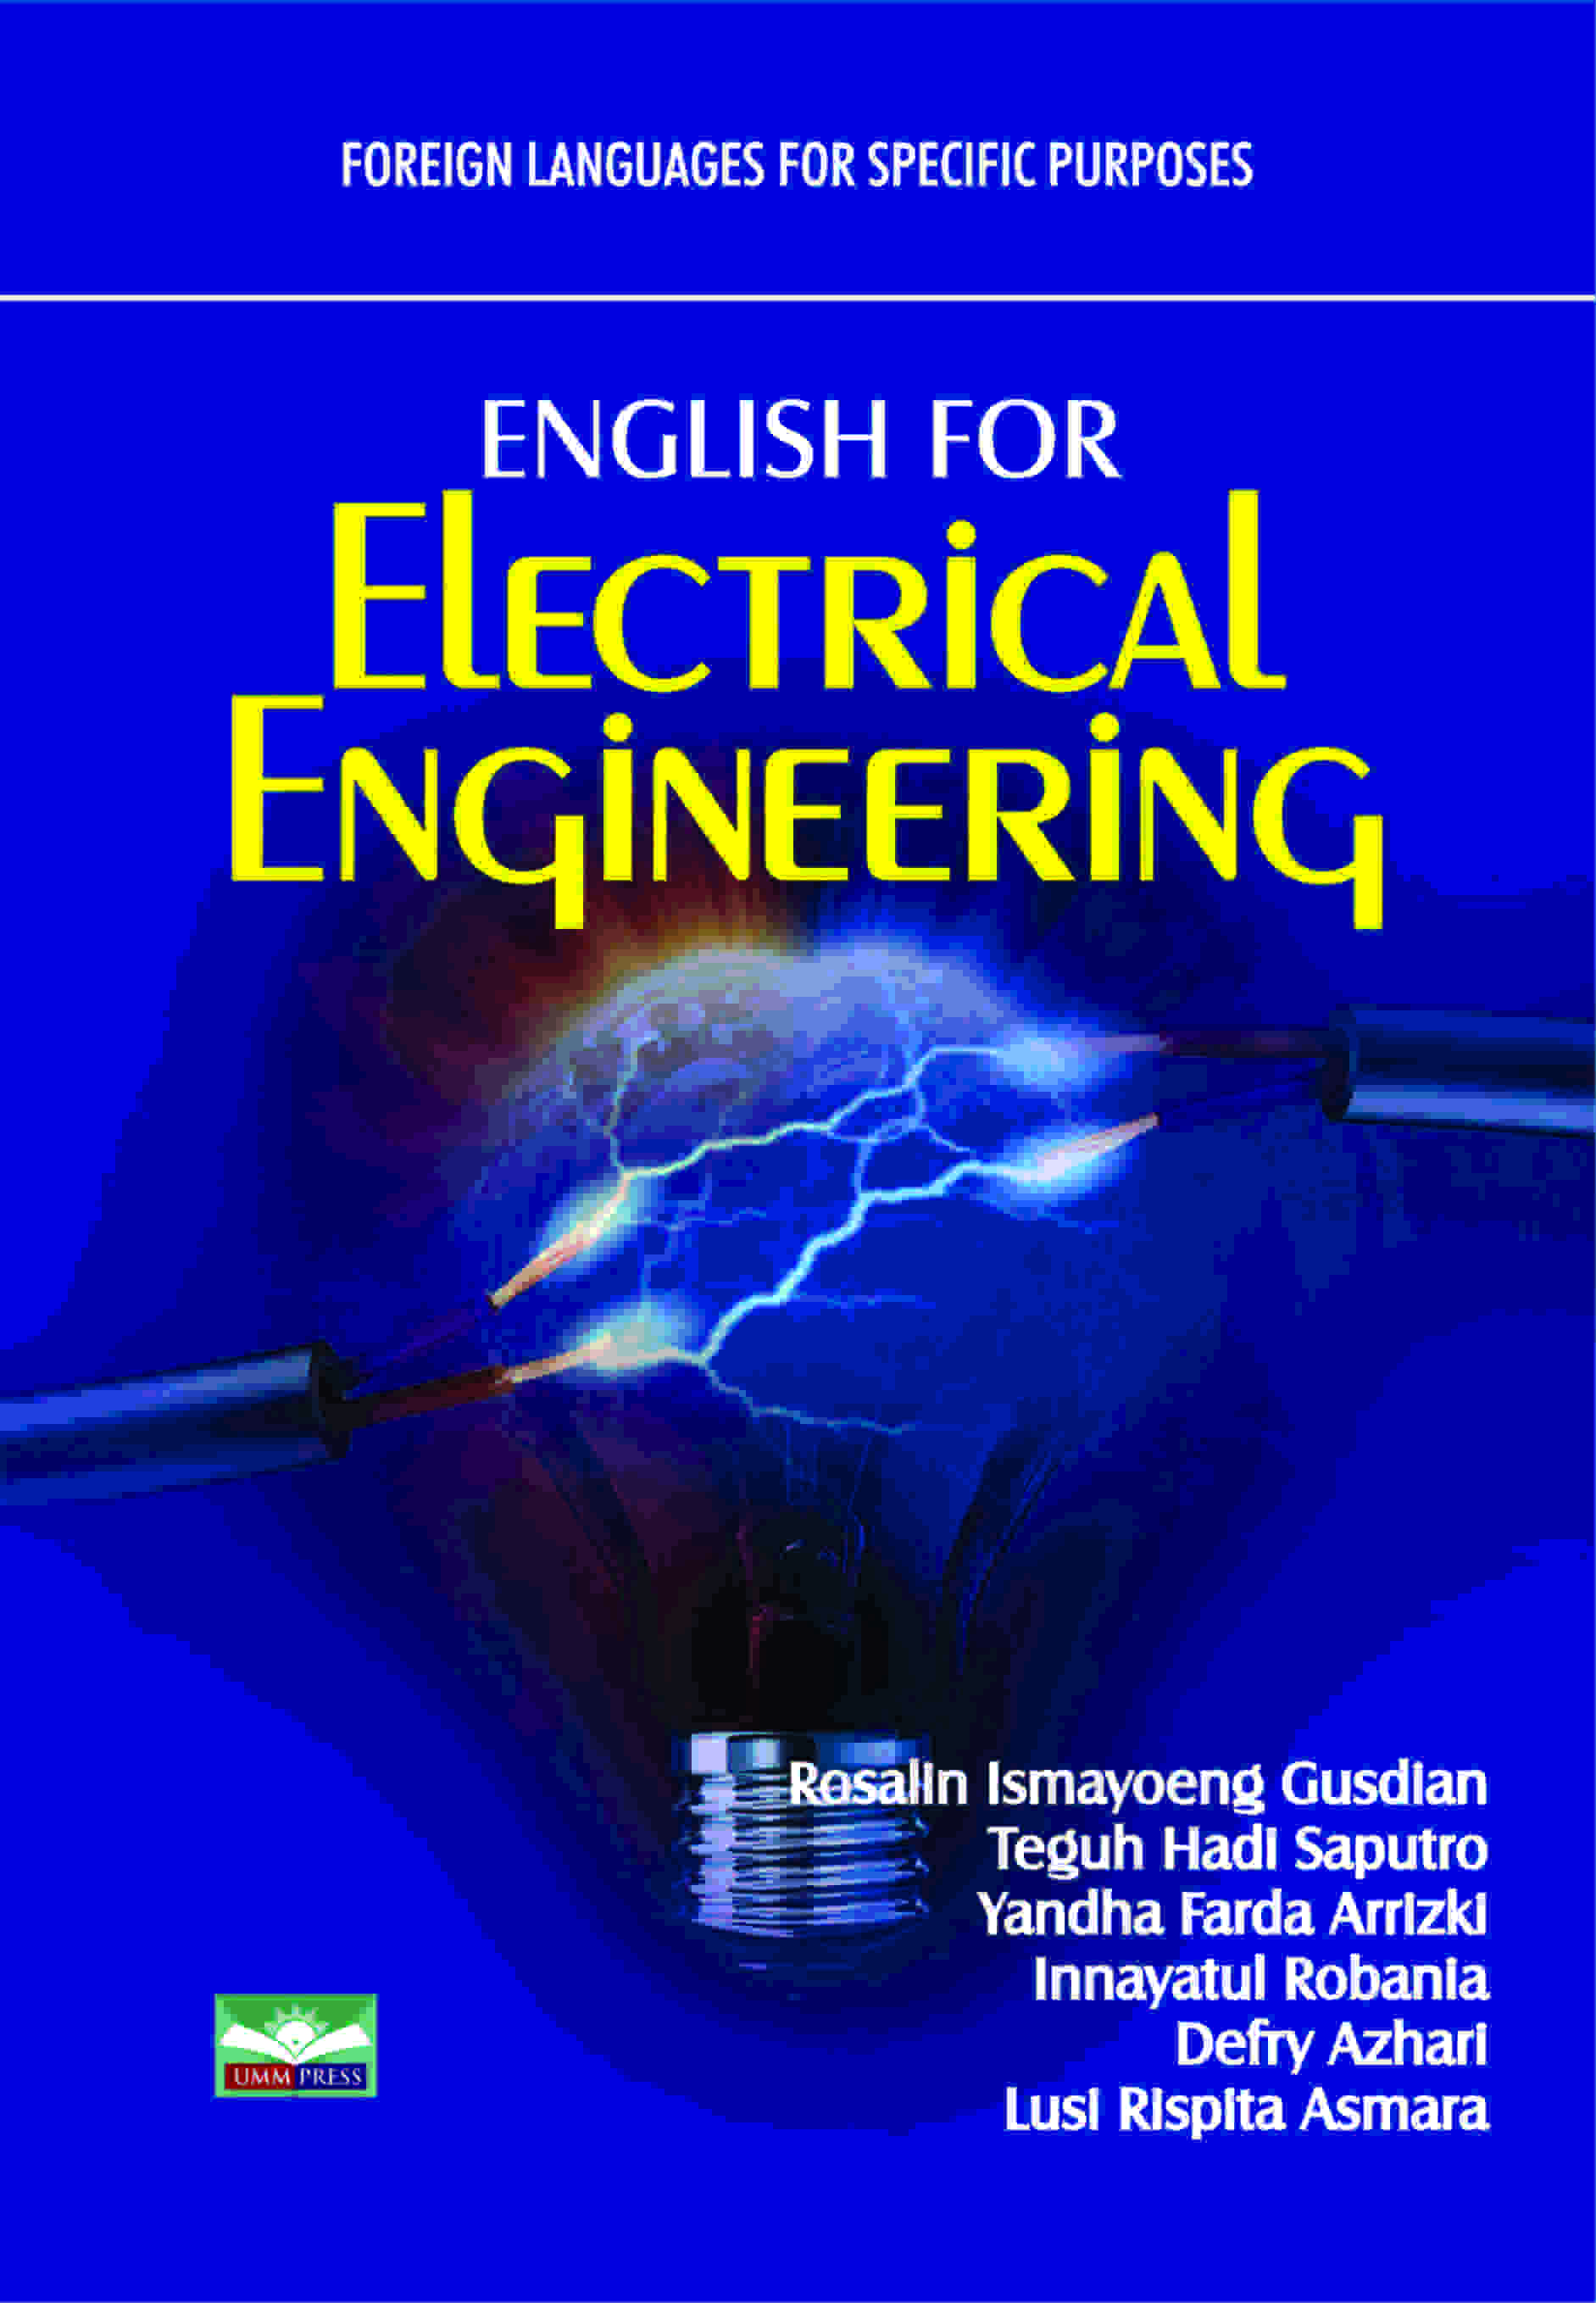 FLSP - ENGLISH FOR ELECTRICAL ENGINEERING